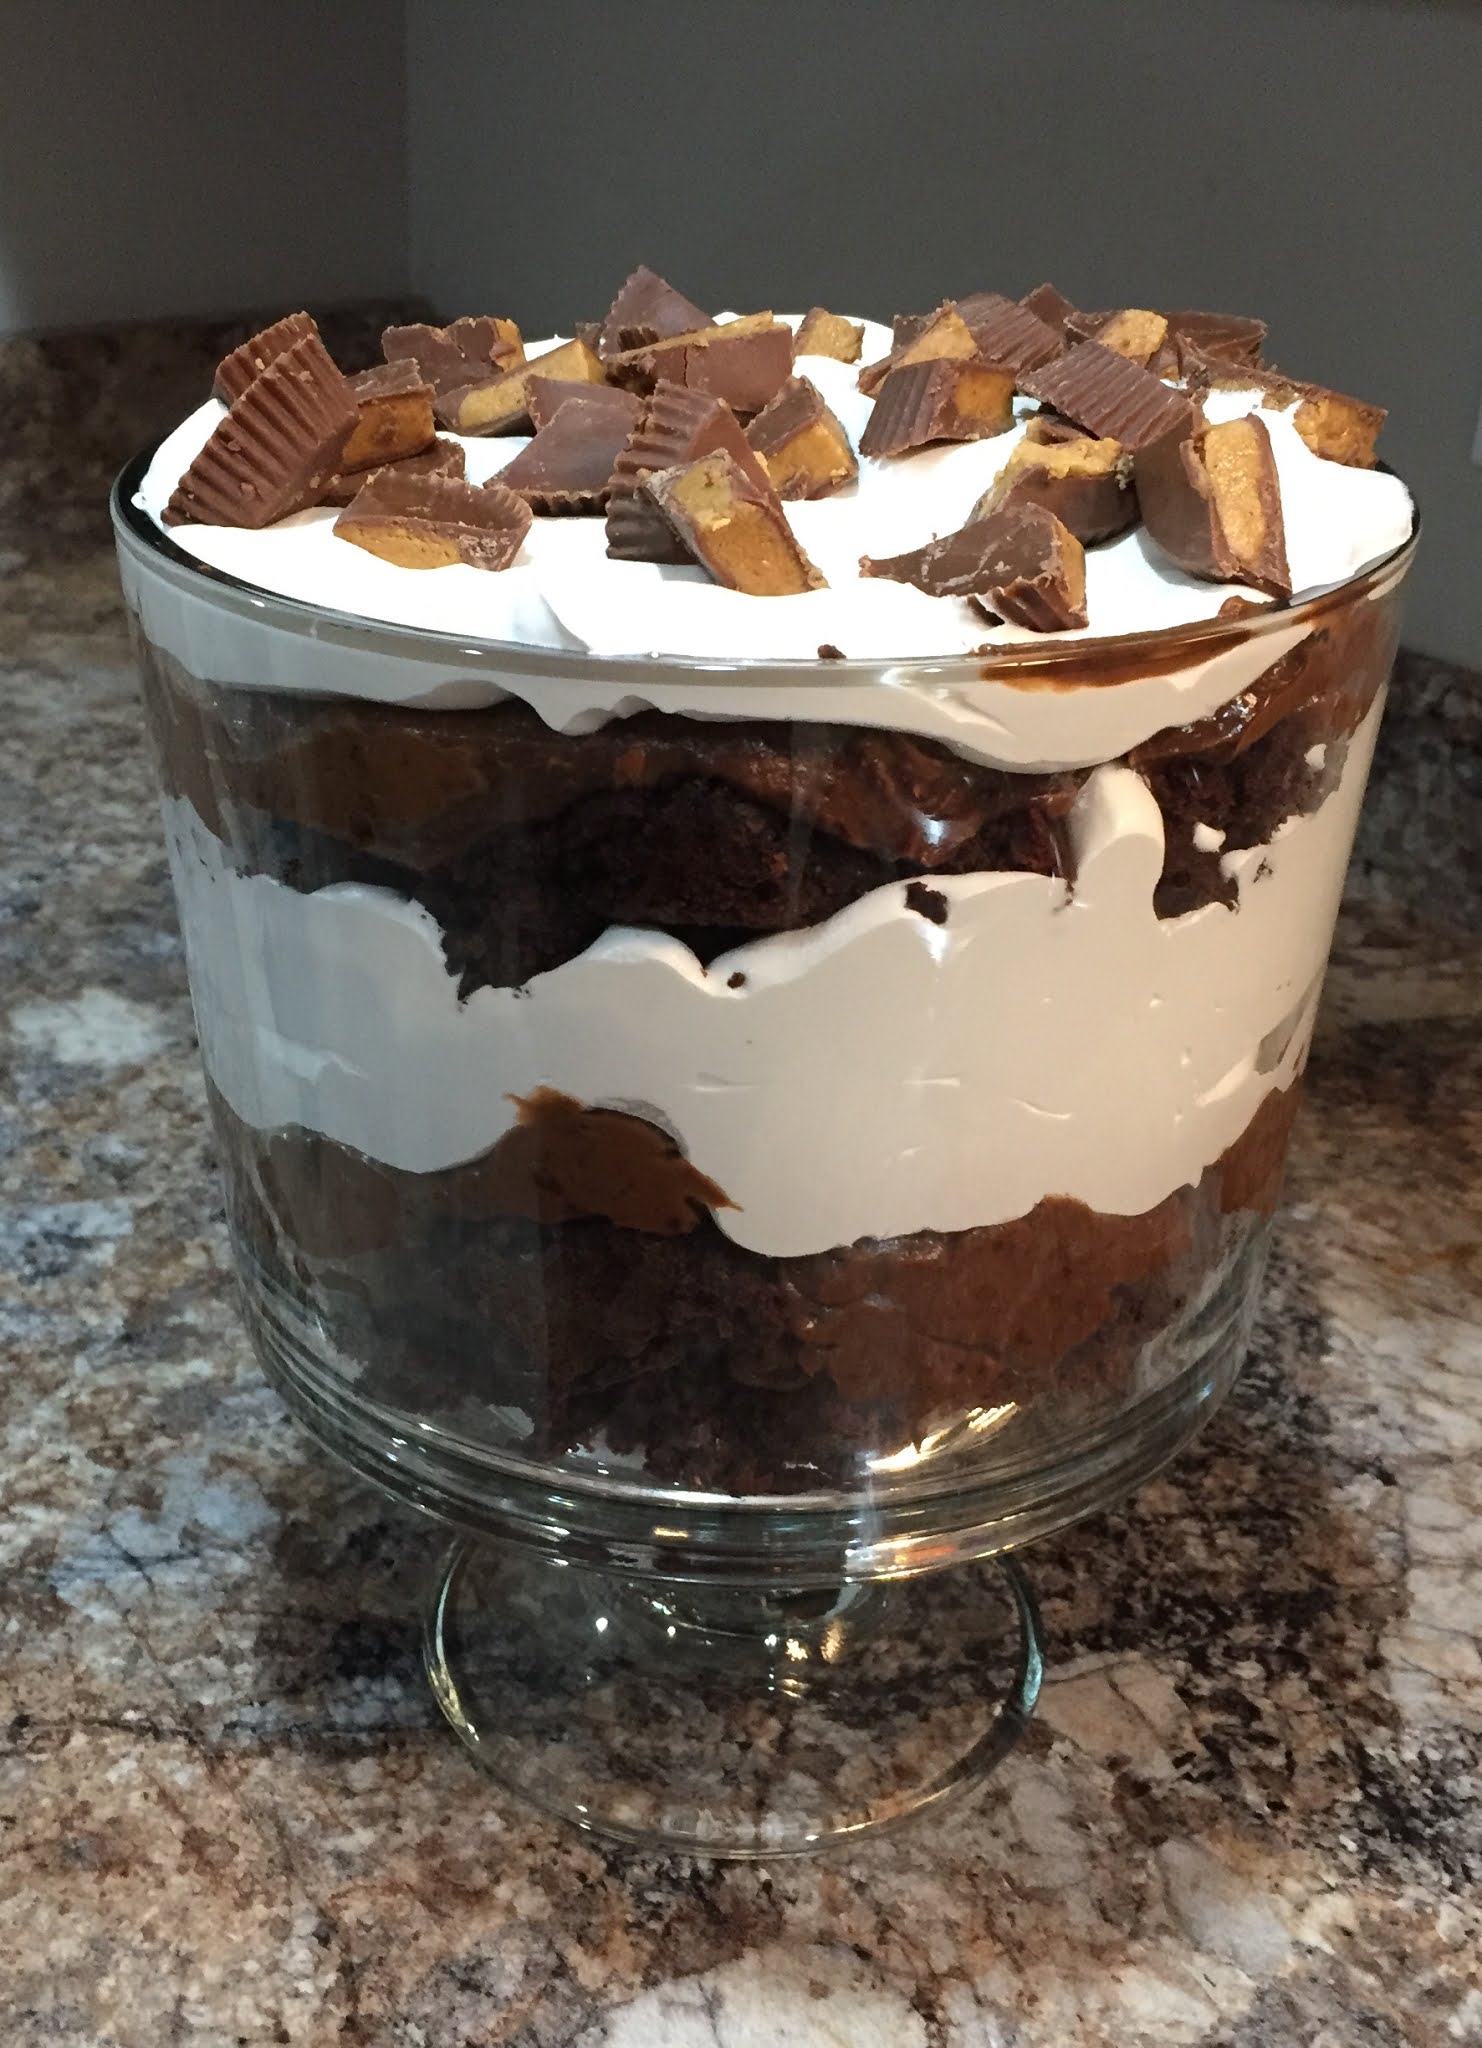 Peanut Butter Cup Trifle